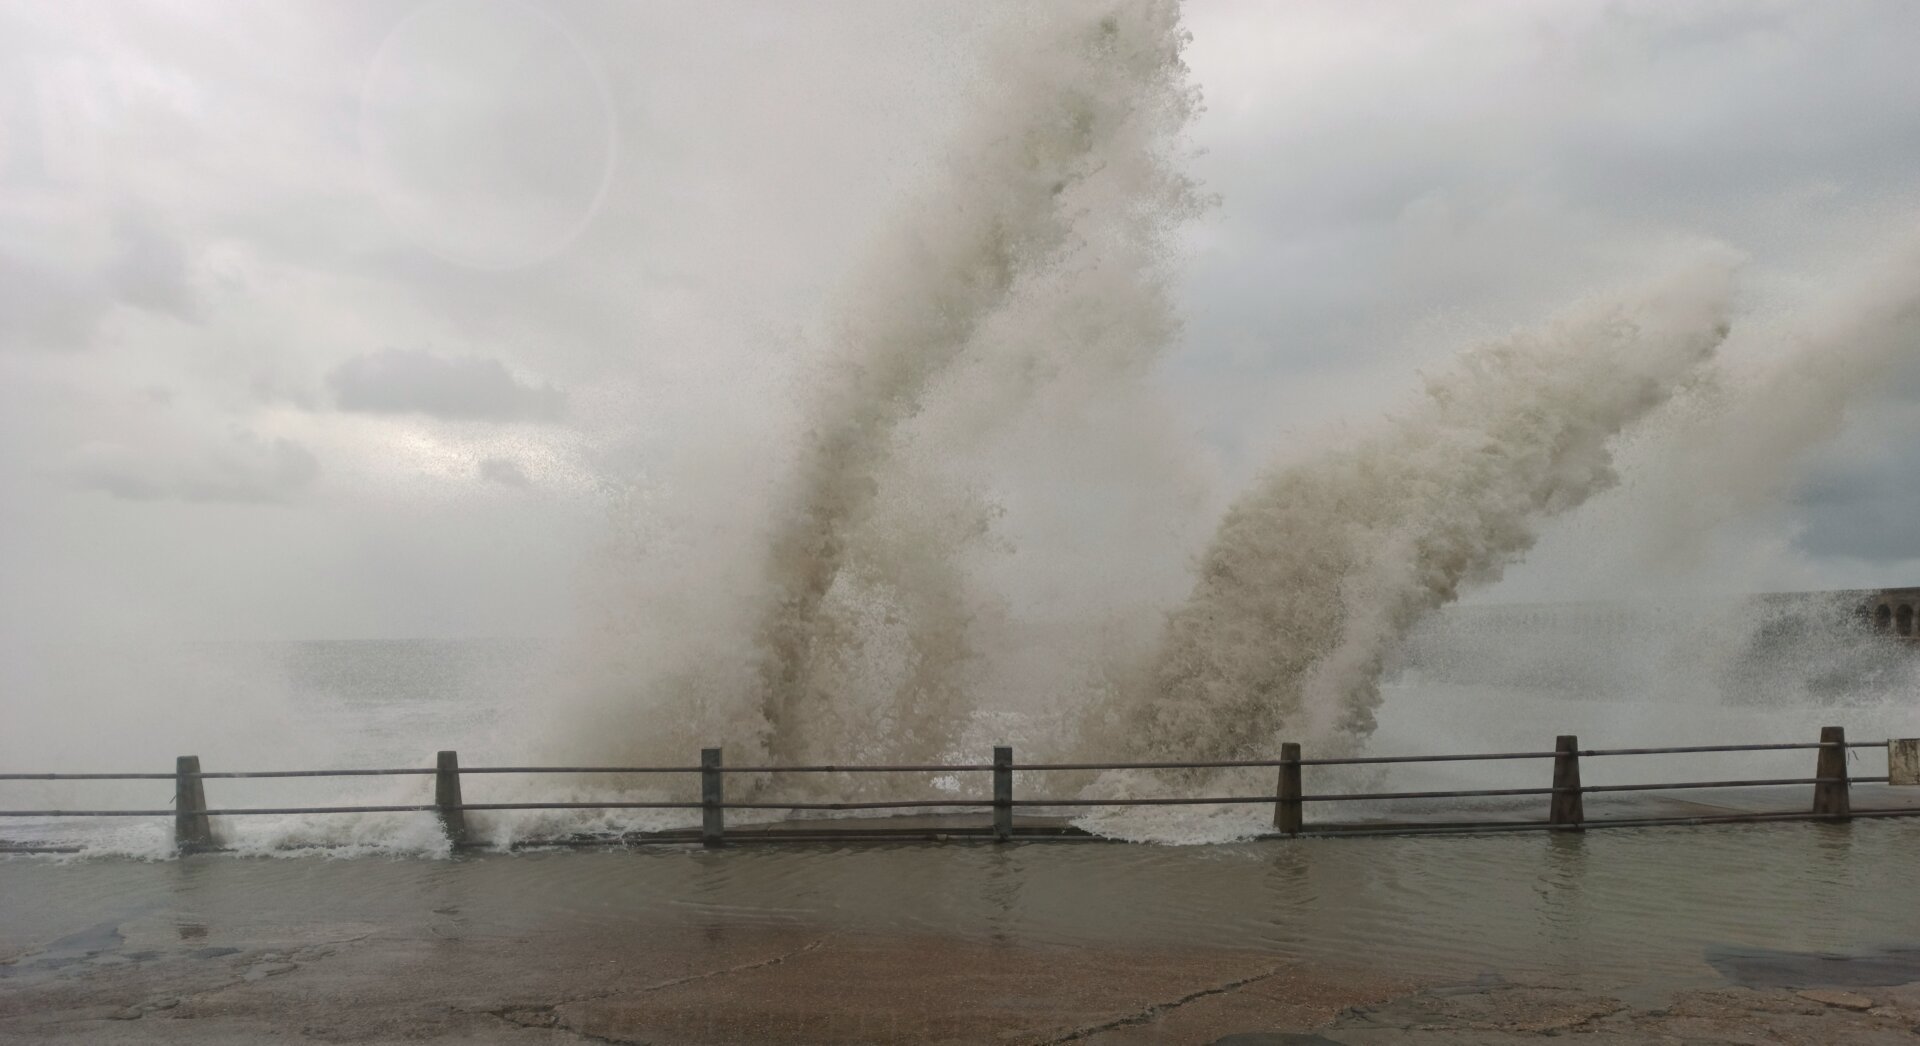 A Powerful Windstorm Changed the Boiling Point of Water in the UK